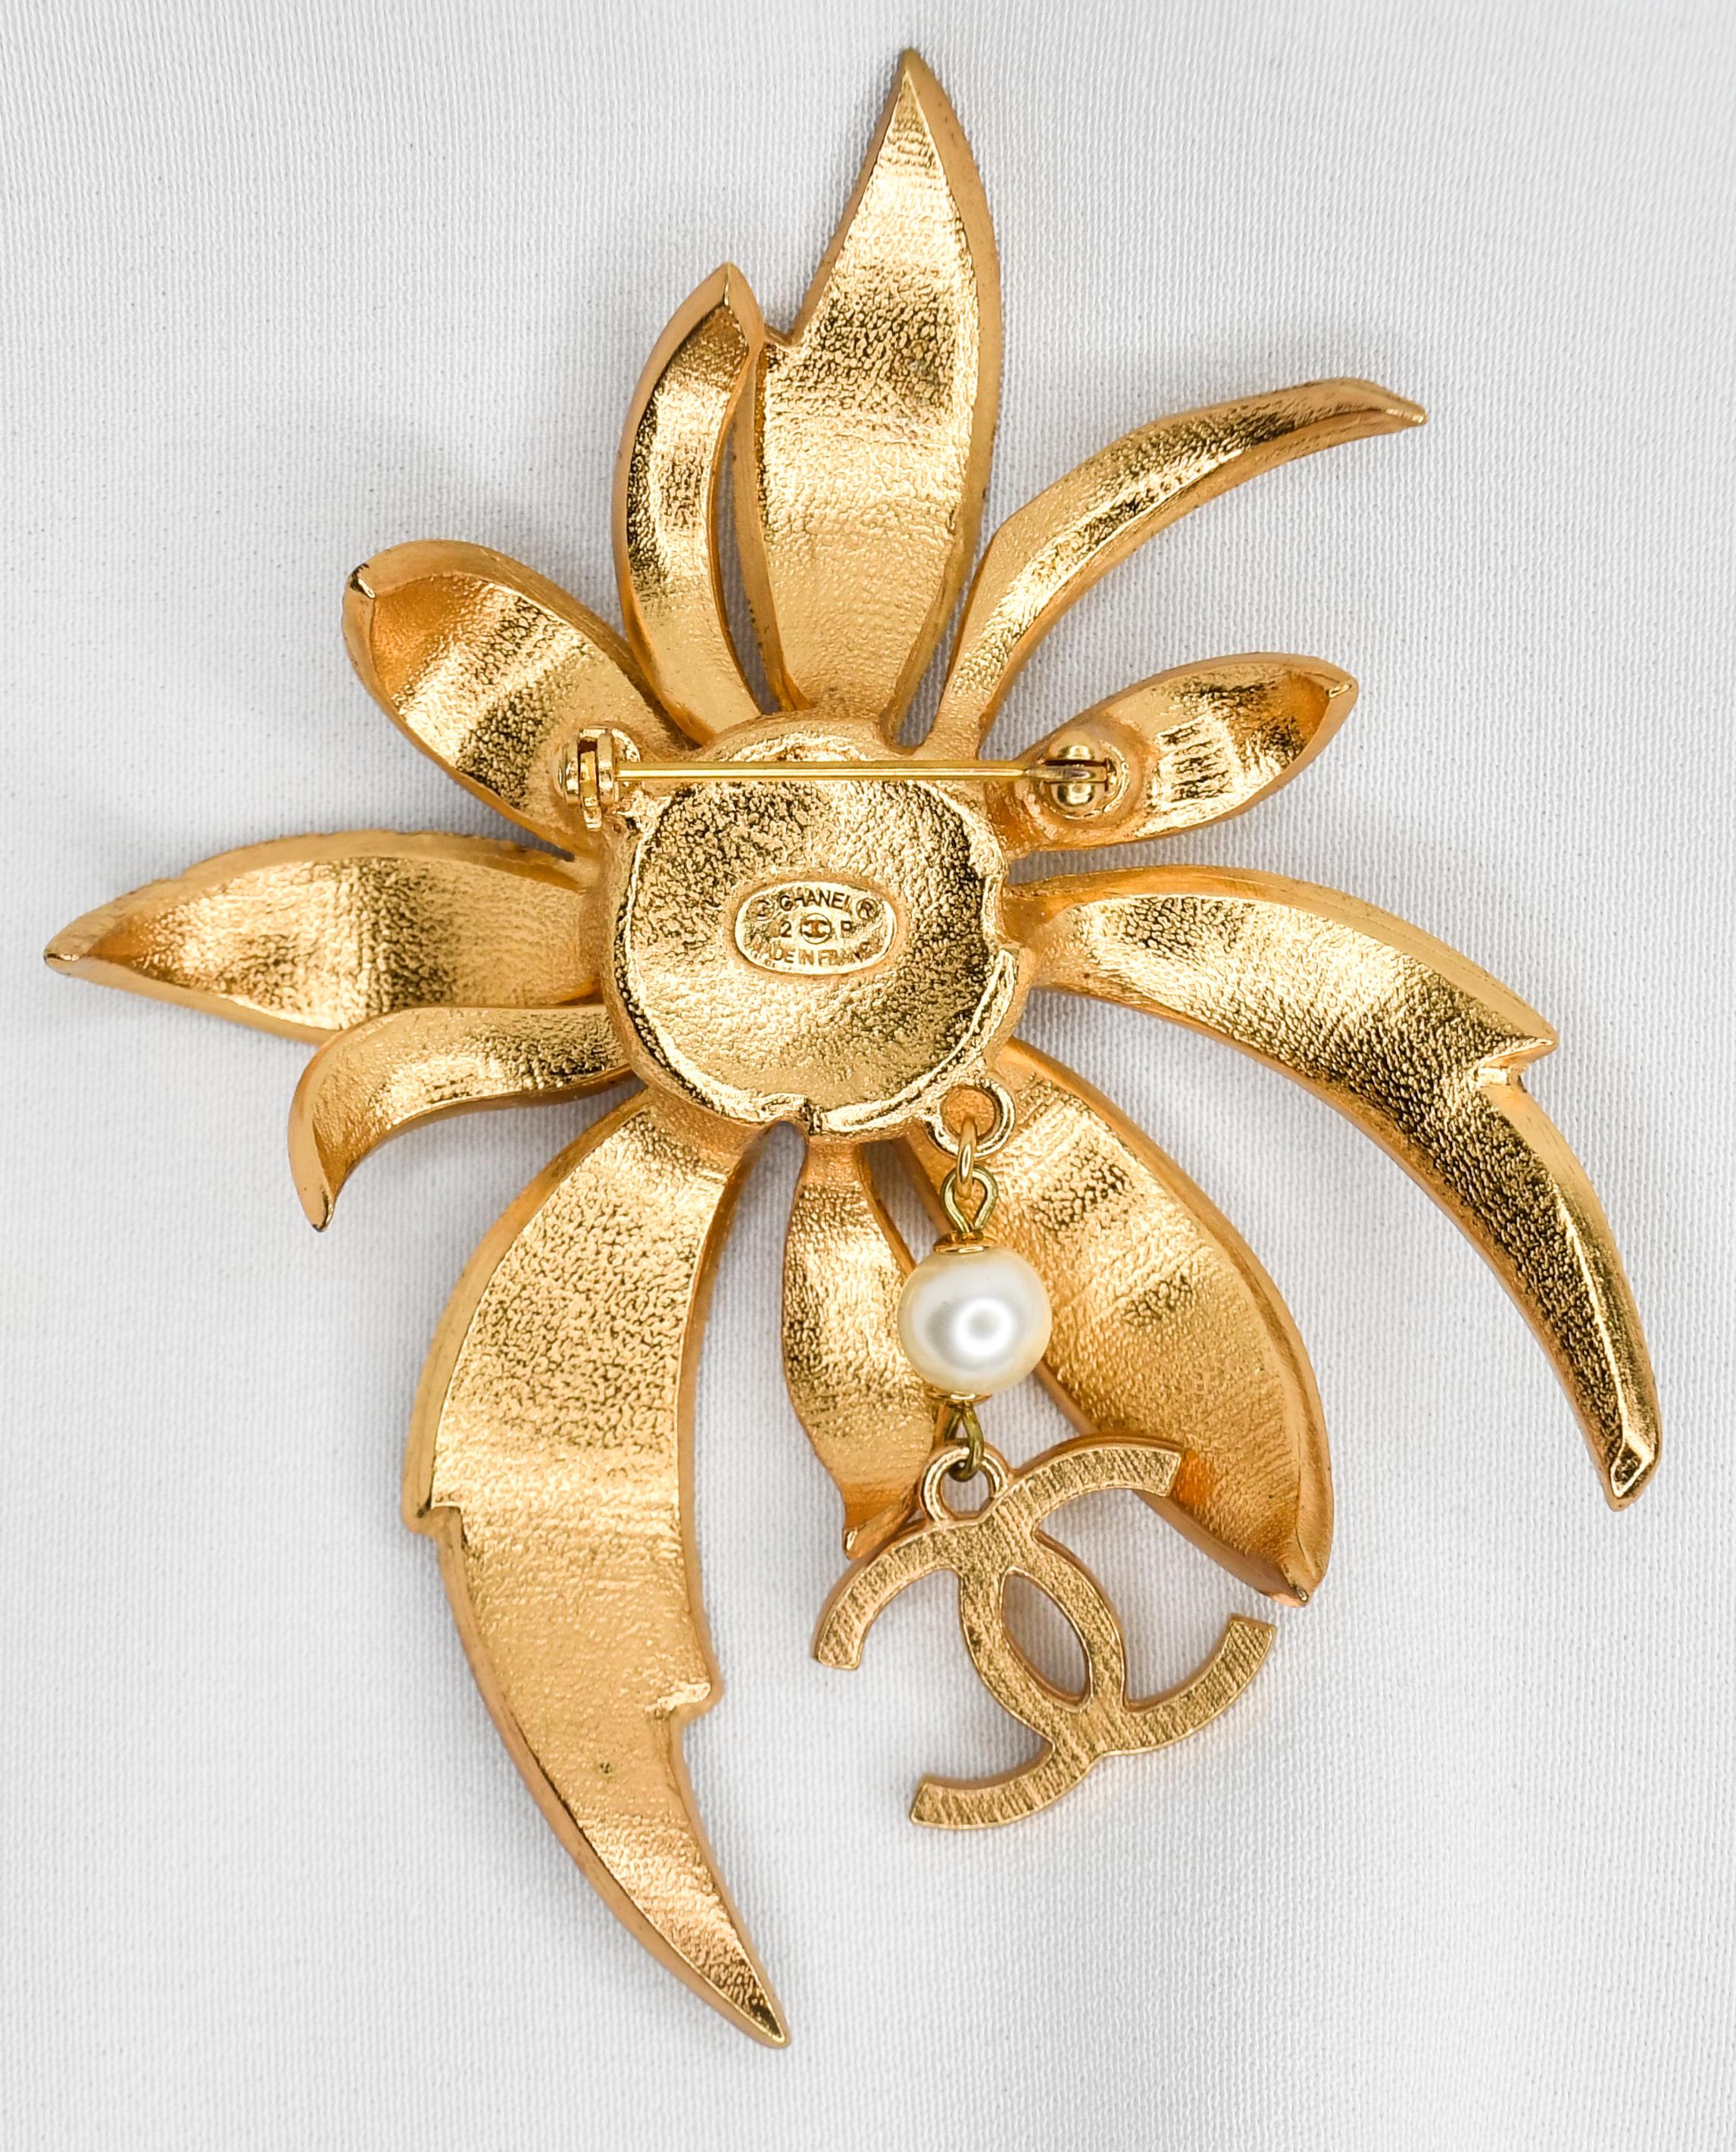 Chanel Stylized Gold Tone Flower Brooch, CC Logo, Pearls and Gripoix Stones 2002 2